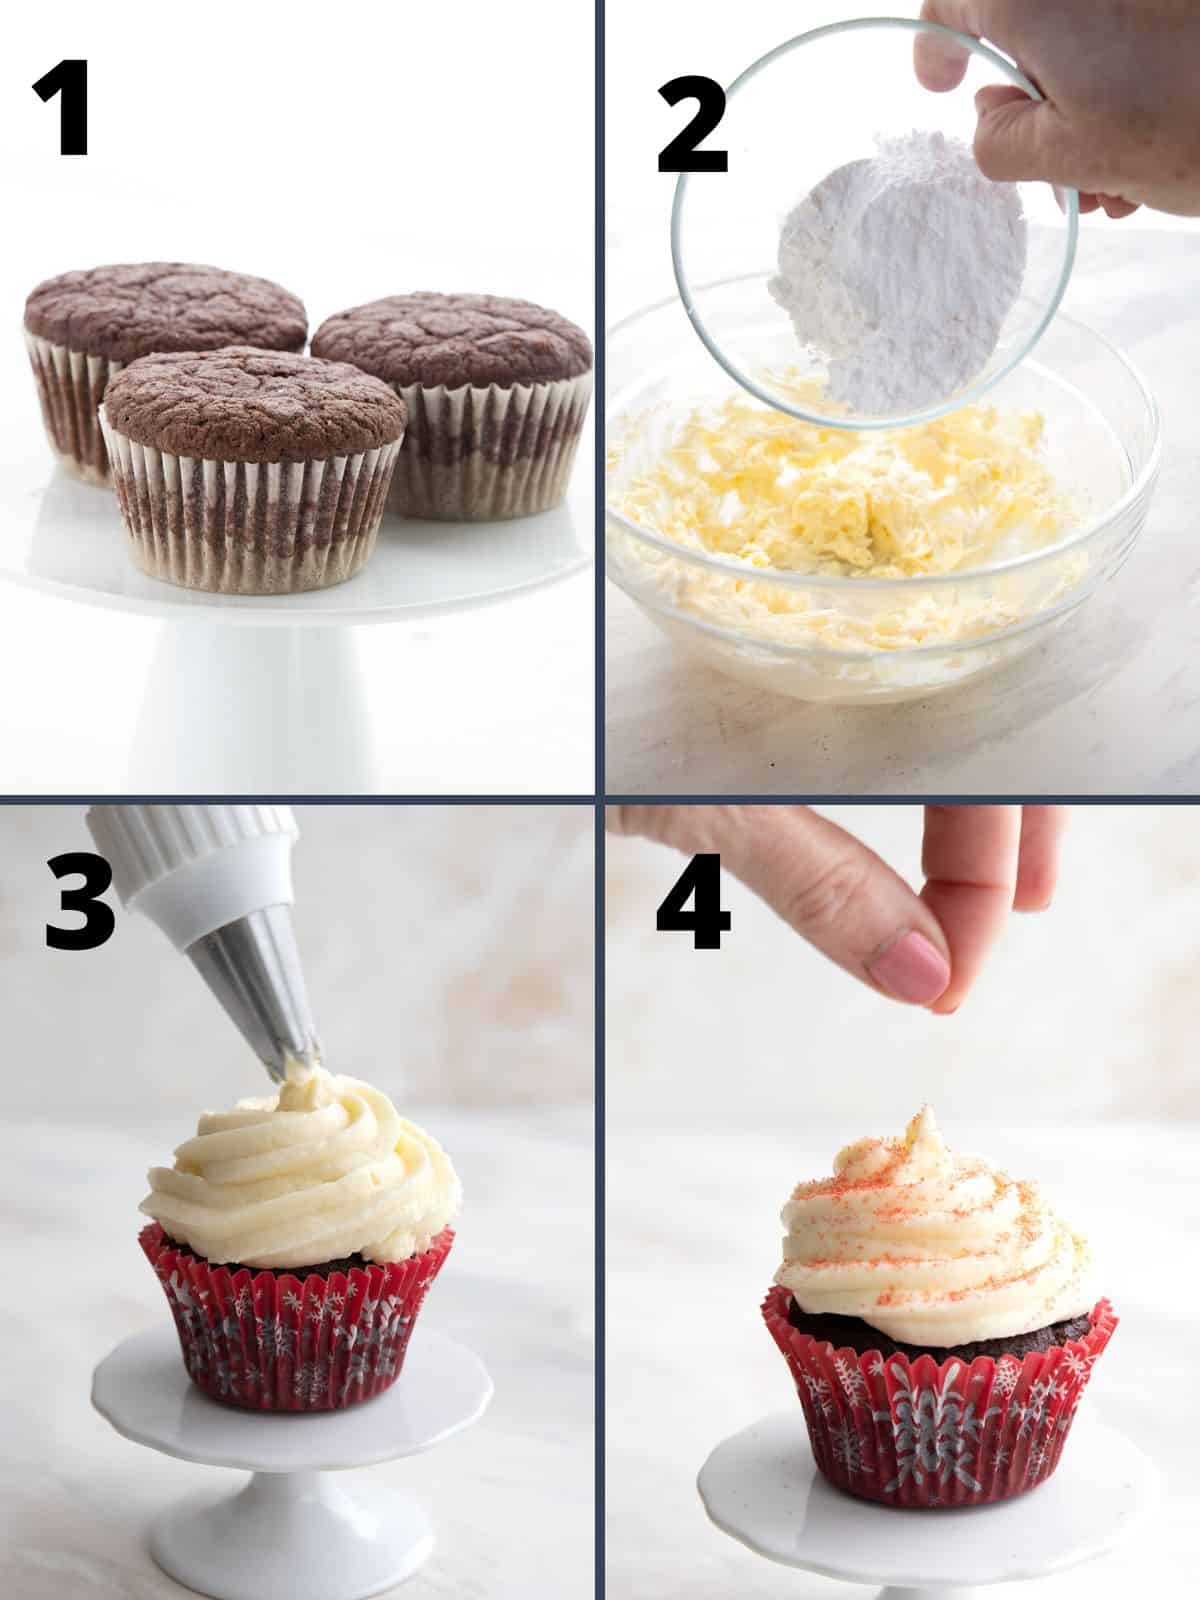 A collage of 4 images showing how to make Keto Peppermint Cupcakes.